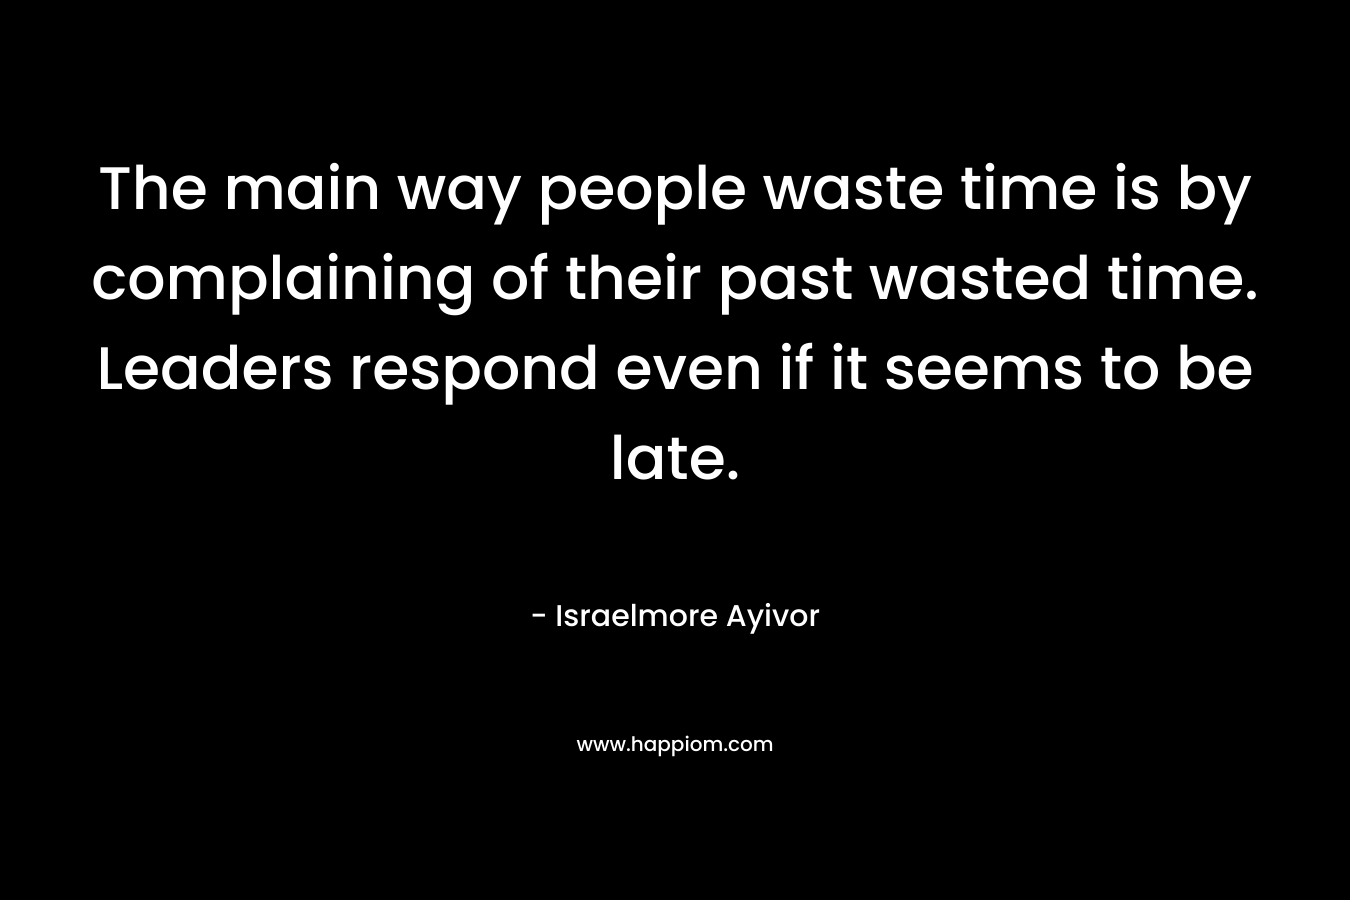 The main way people waste time is by complaining of their past wasted time. Leaders respond even if it seems to be late.